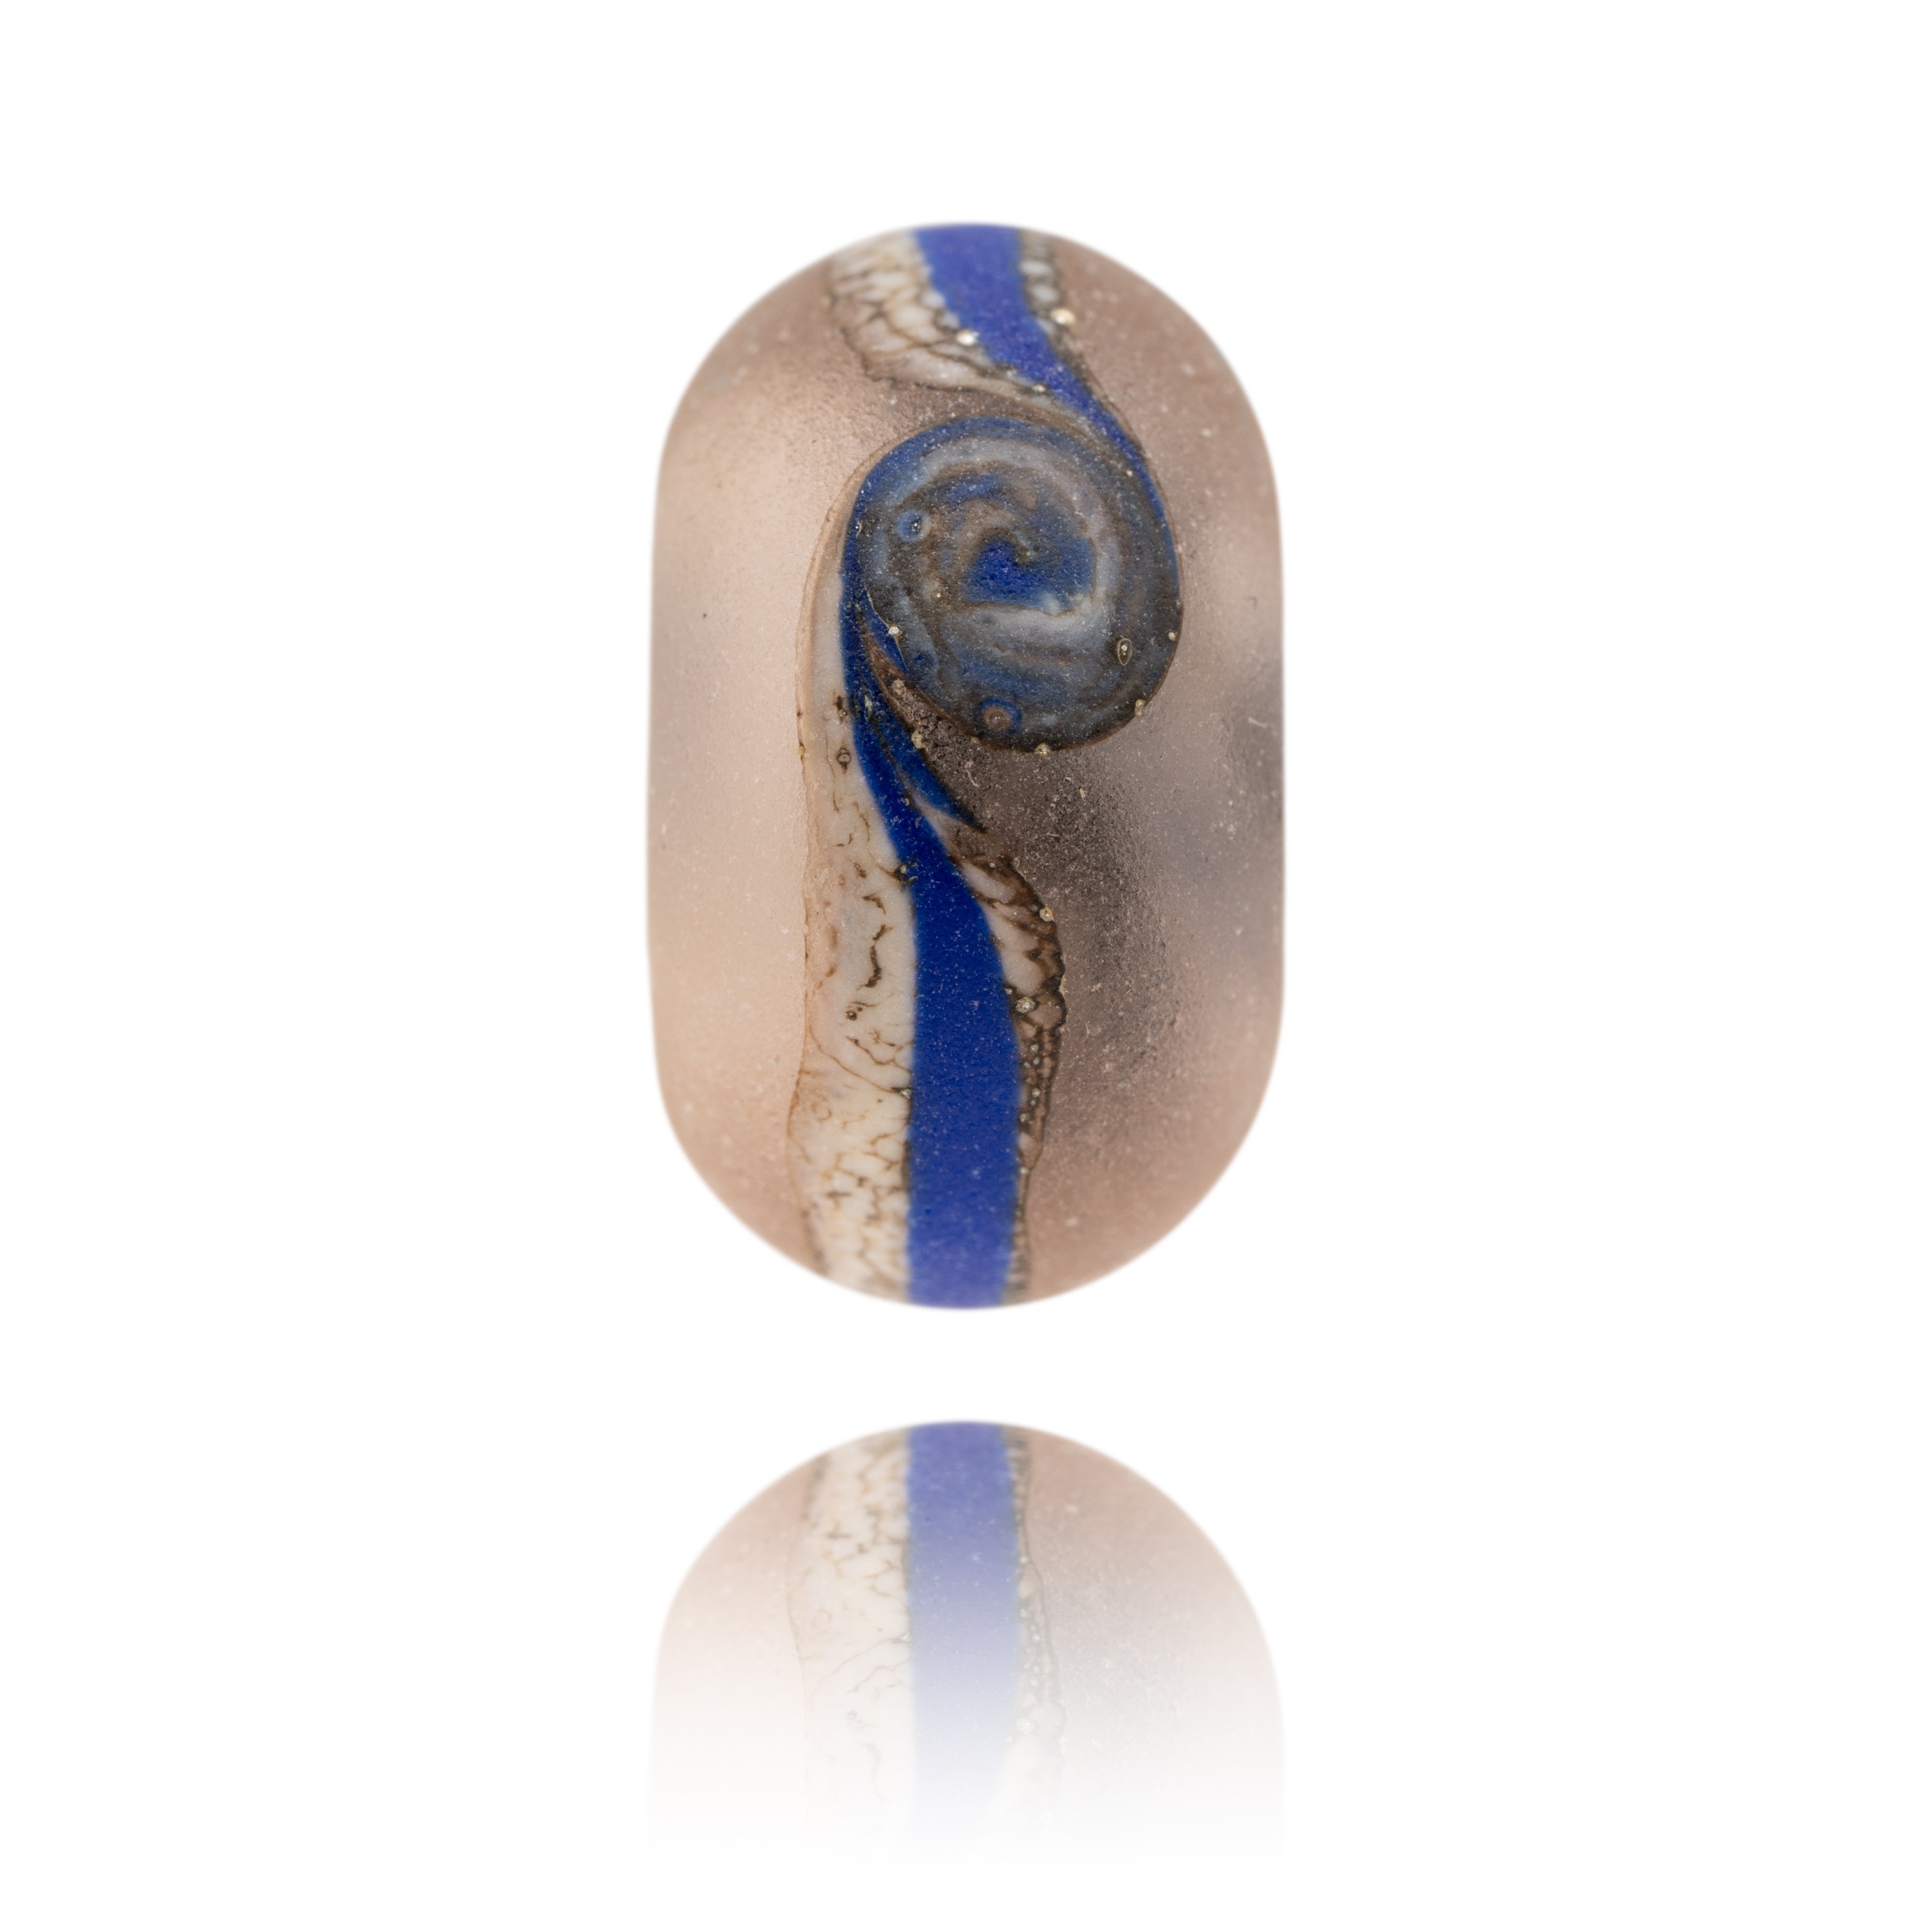 Frosted pink glass bead decorated with blue stripe around middle. Representing Embleton Beach in Northumberland.